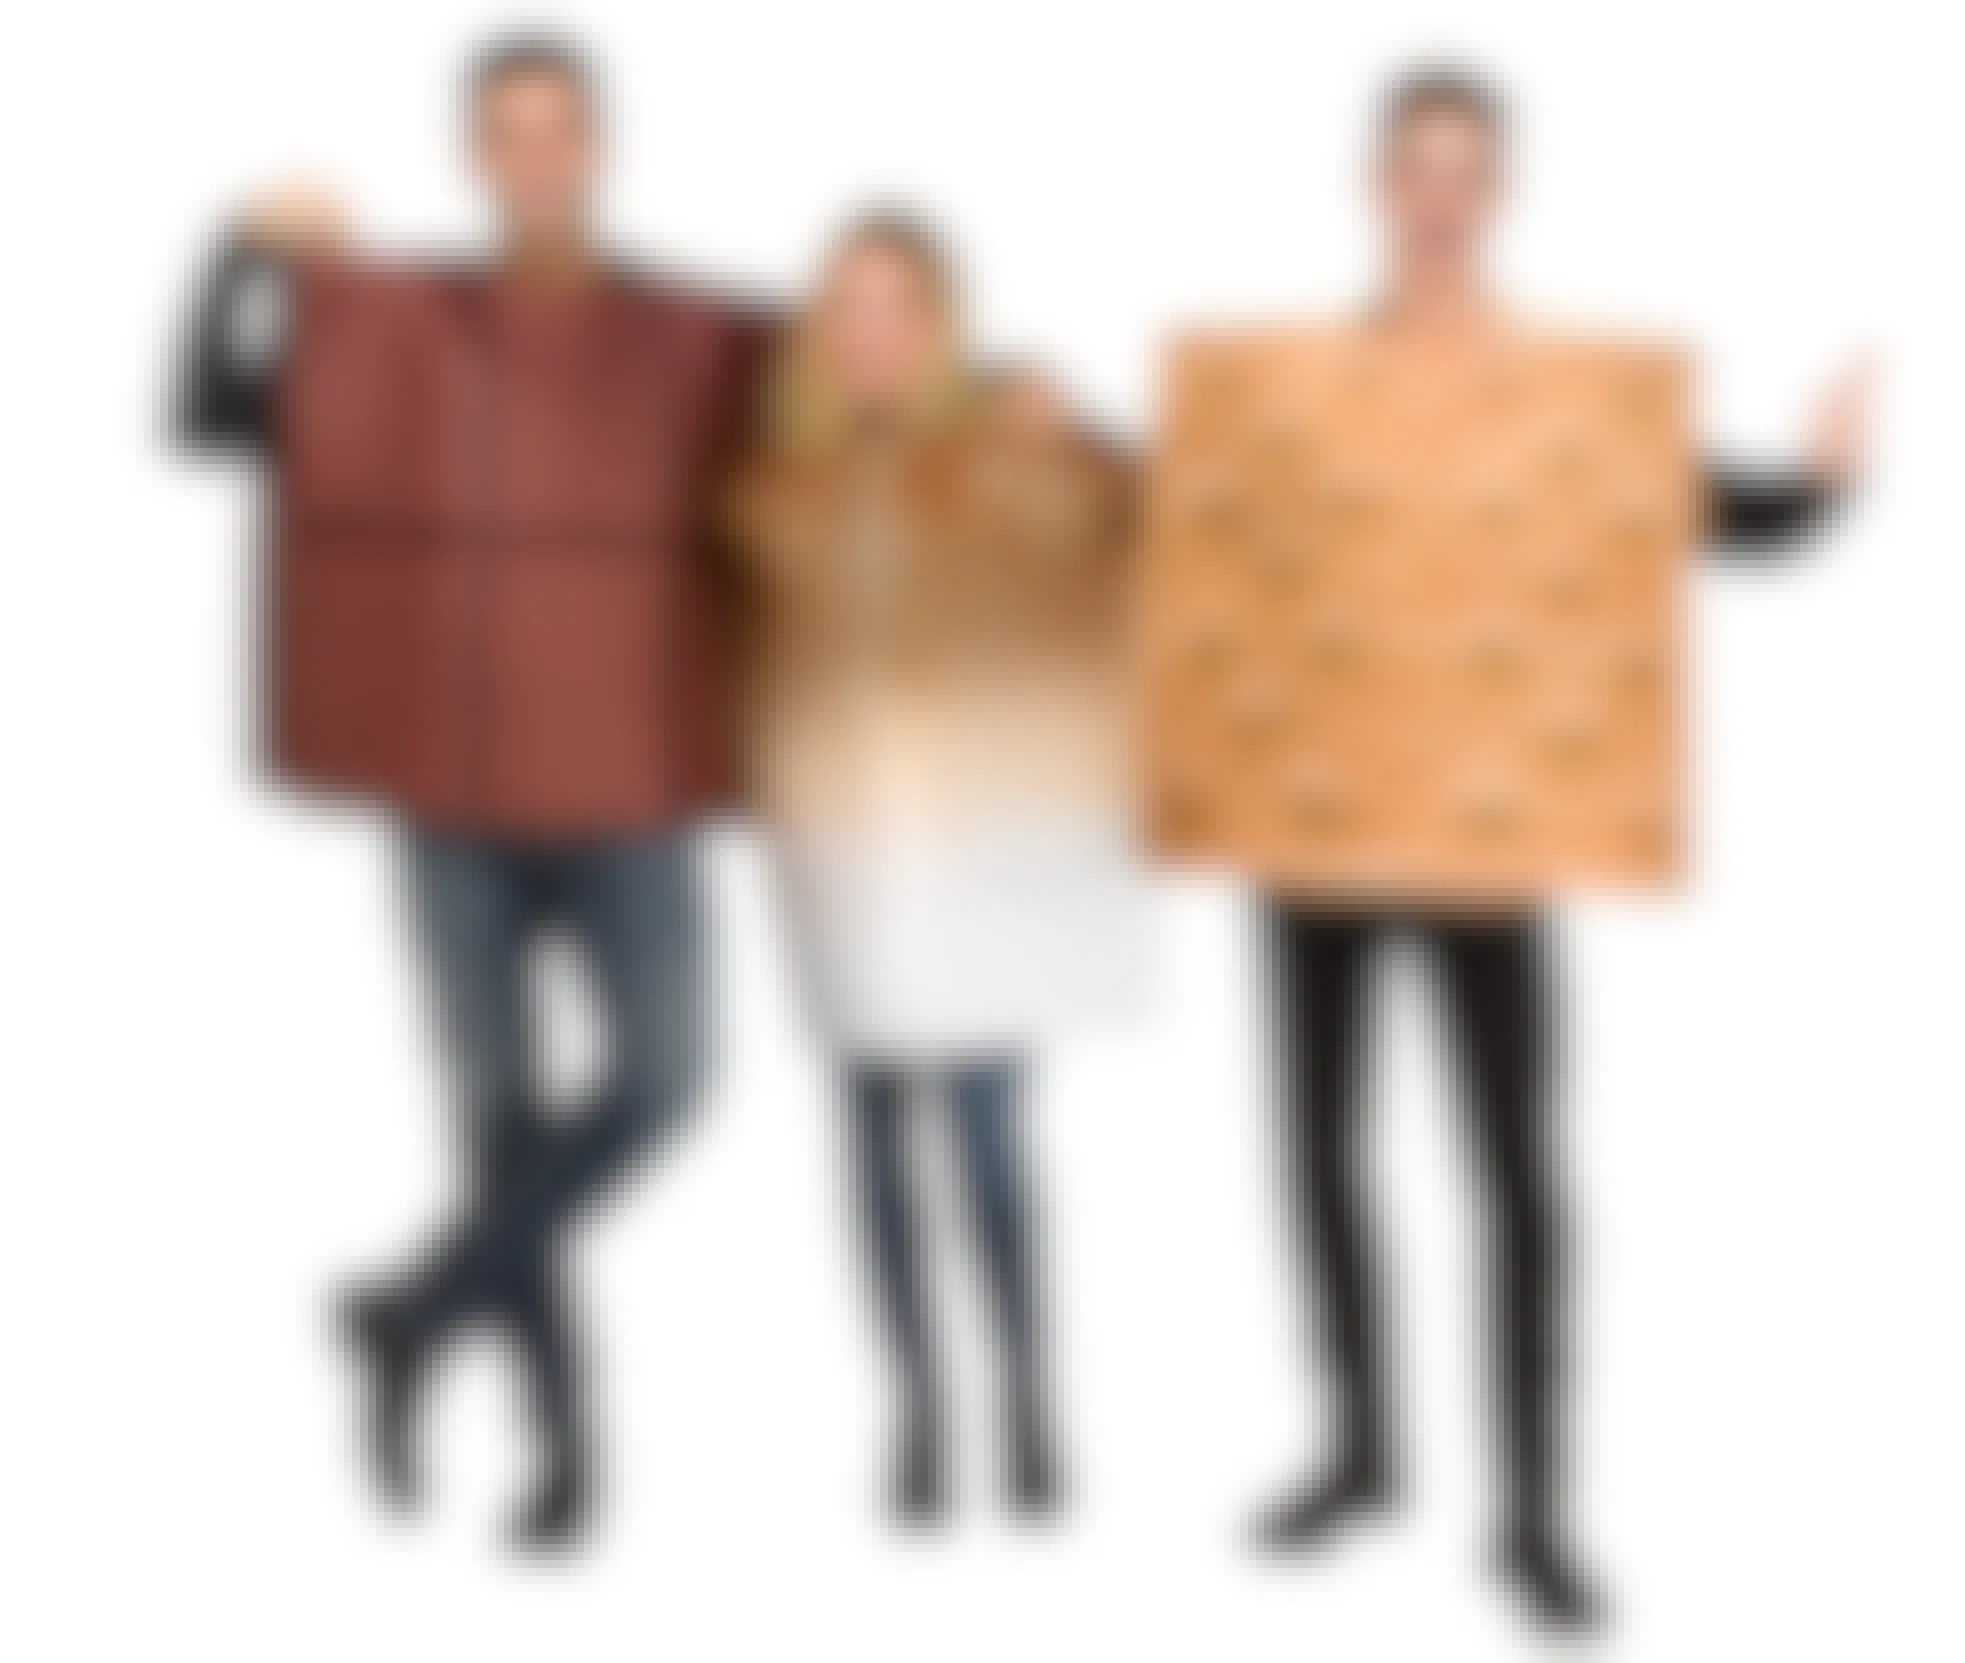 adults dressed as chocolate marshmallow and graham cracker s'mores Halloween costumes